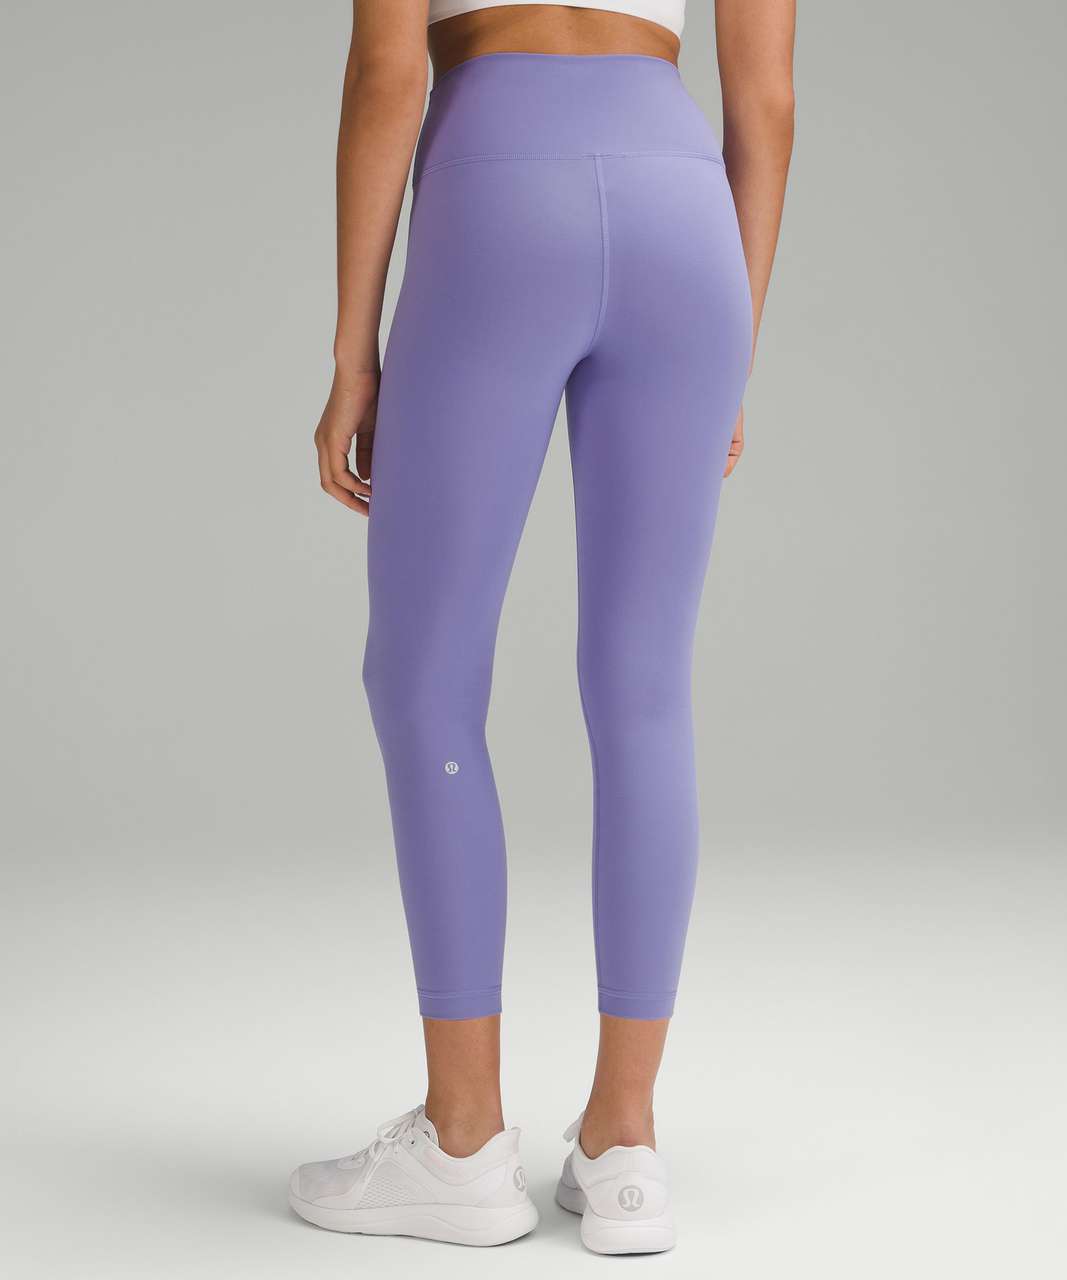 Wunder Train High-Rise Tight with Pockets 25, Brier Rose